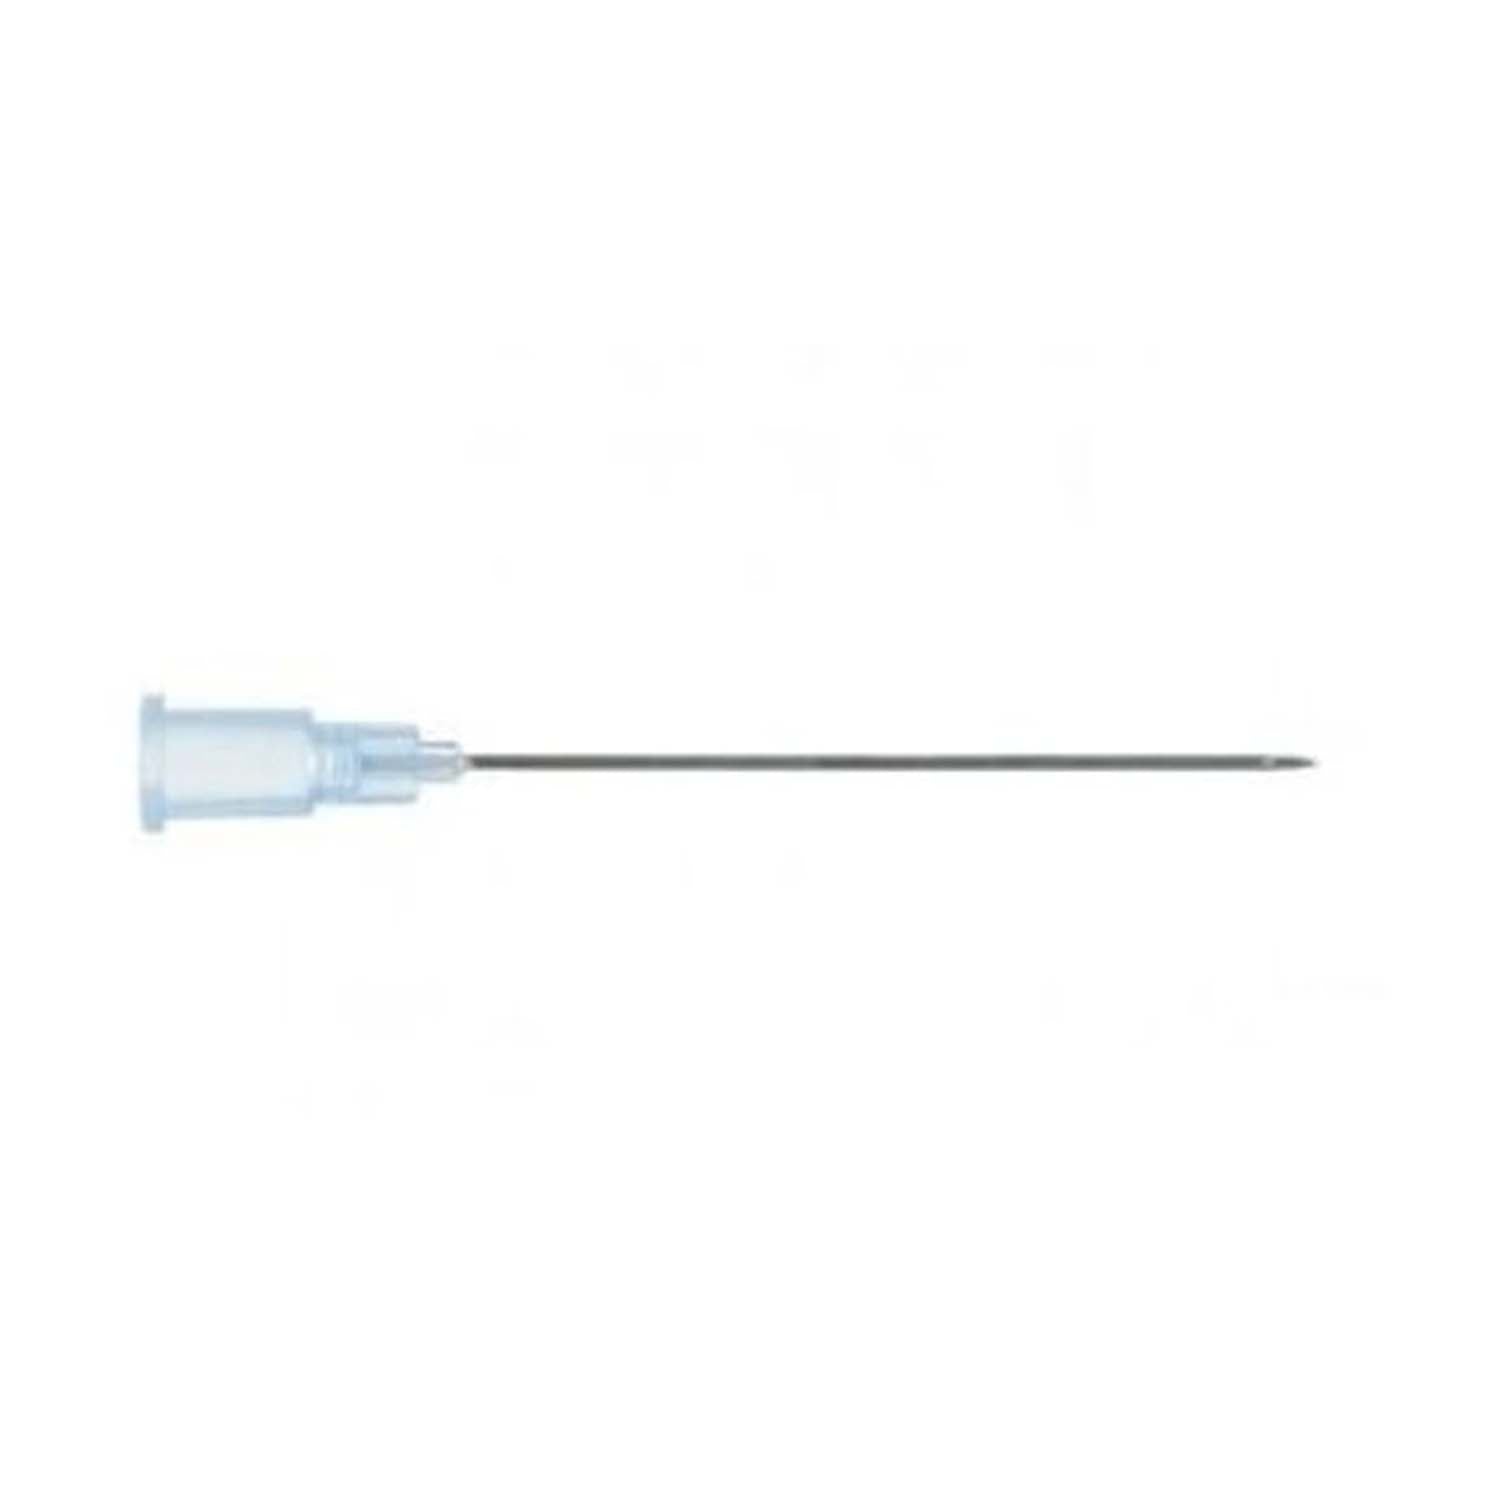 Braun Sterican Hypodermic Needle | 23g x 1" | Pack of 100